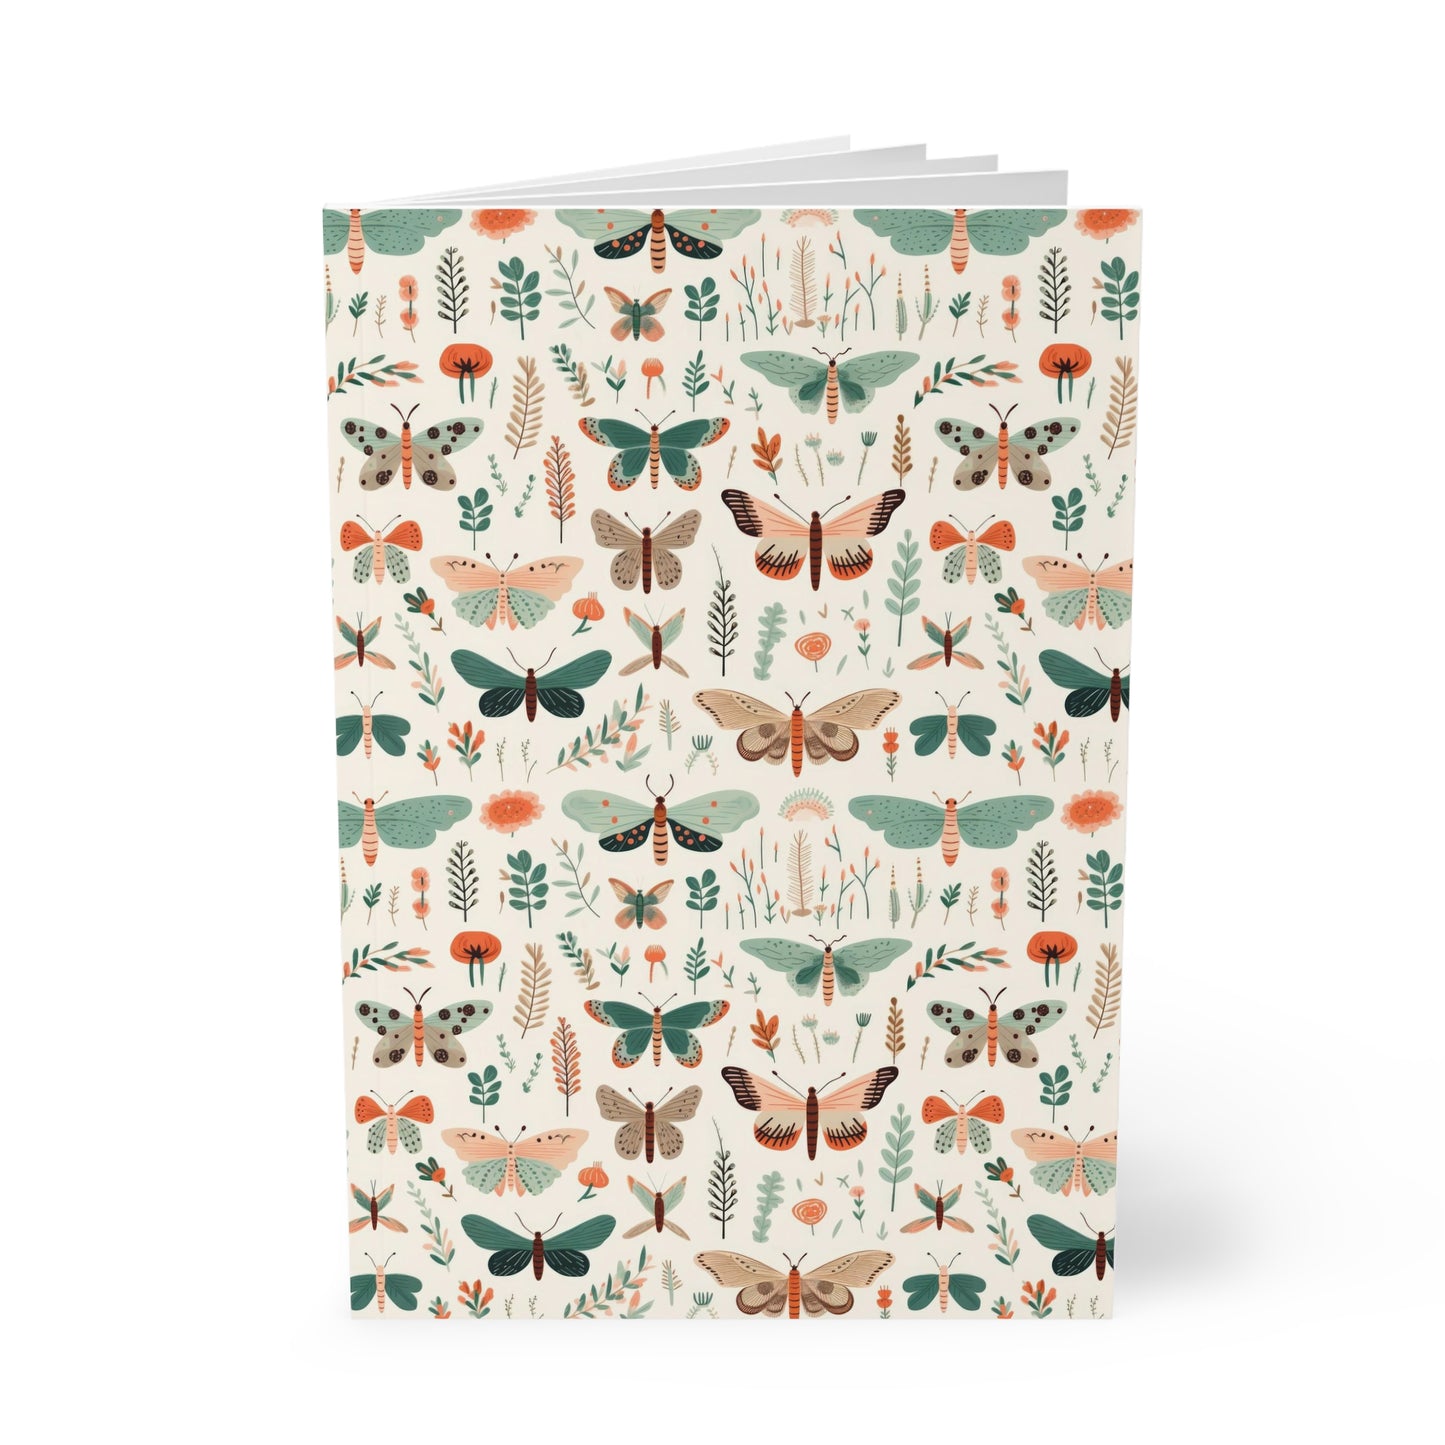 Softcover Notebook featuring Colorful Moths